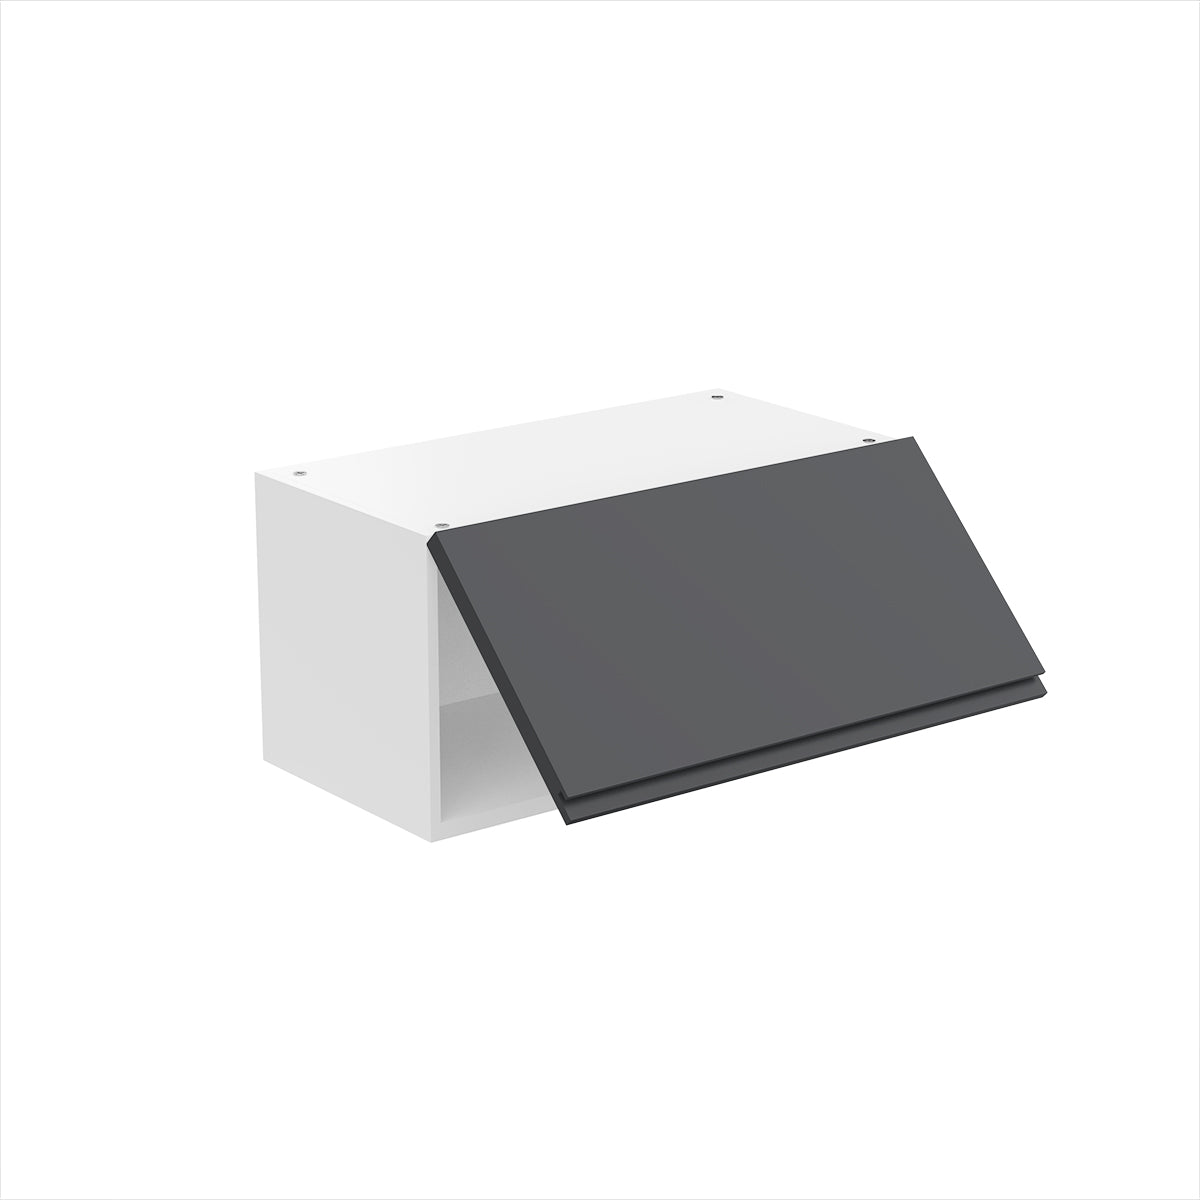 RTA - Lacquer Grey - Horizontal Door Wall Cabinets | 24"W x 12"H x 12"D